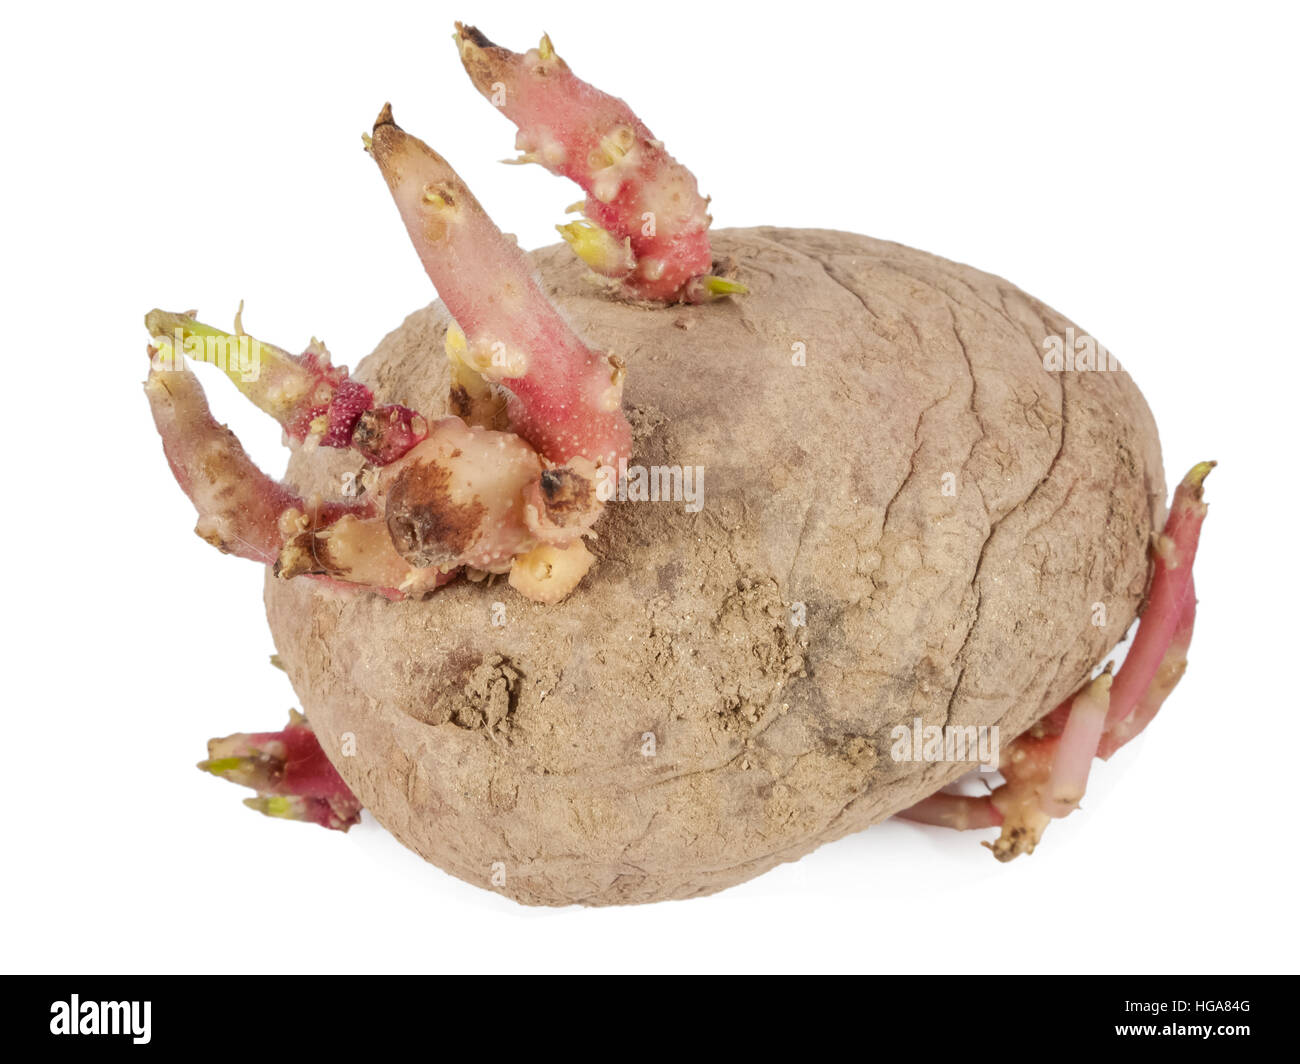 Old potato sprouting with a close up of the sprouts isolated on a white background Stock Photo